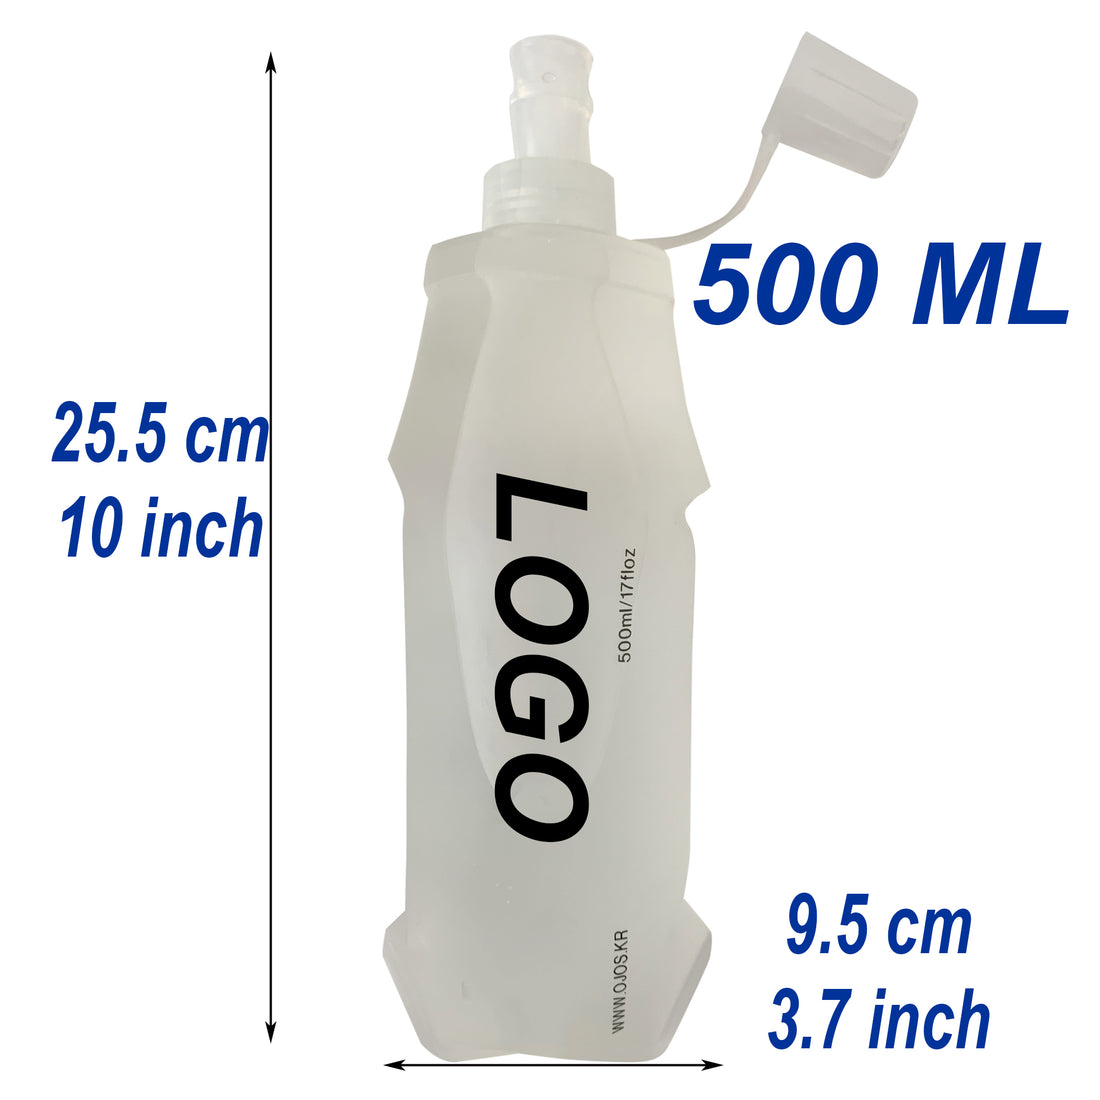 White Soft Water Flask 300 ML 500 ML BPA Free Food Safety Running Water Bottle Collapsible Flask For Racing, Hiking, Camping, Cycling